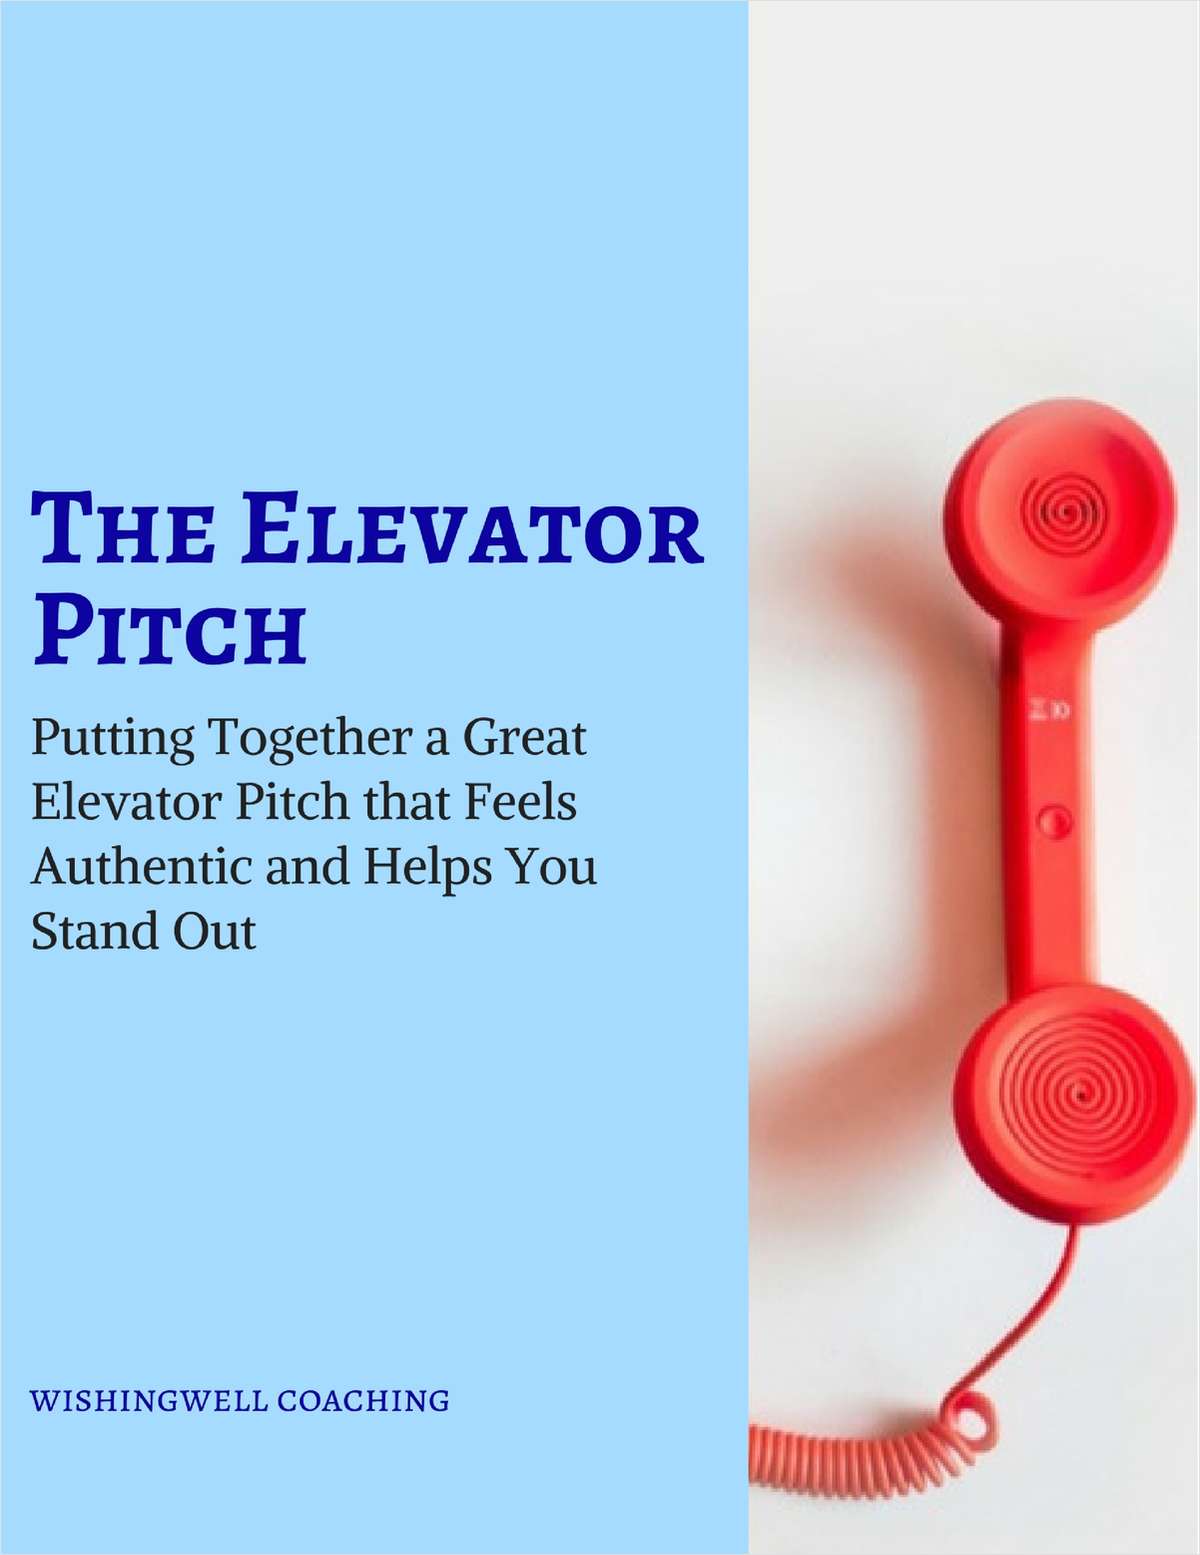 The Elevator Pitch - Putting Together a Great Elevator Pitch that Feels Authentic and Helps You Stand Out